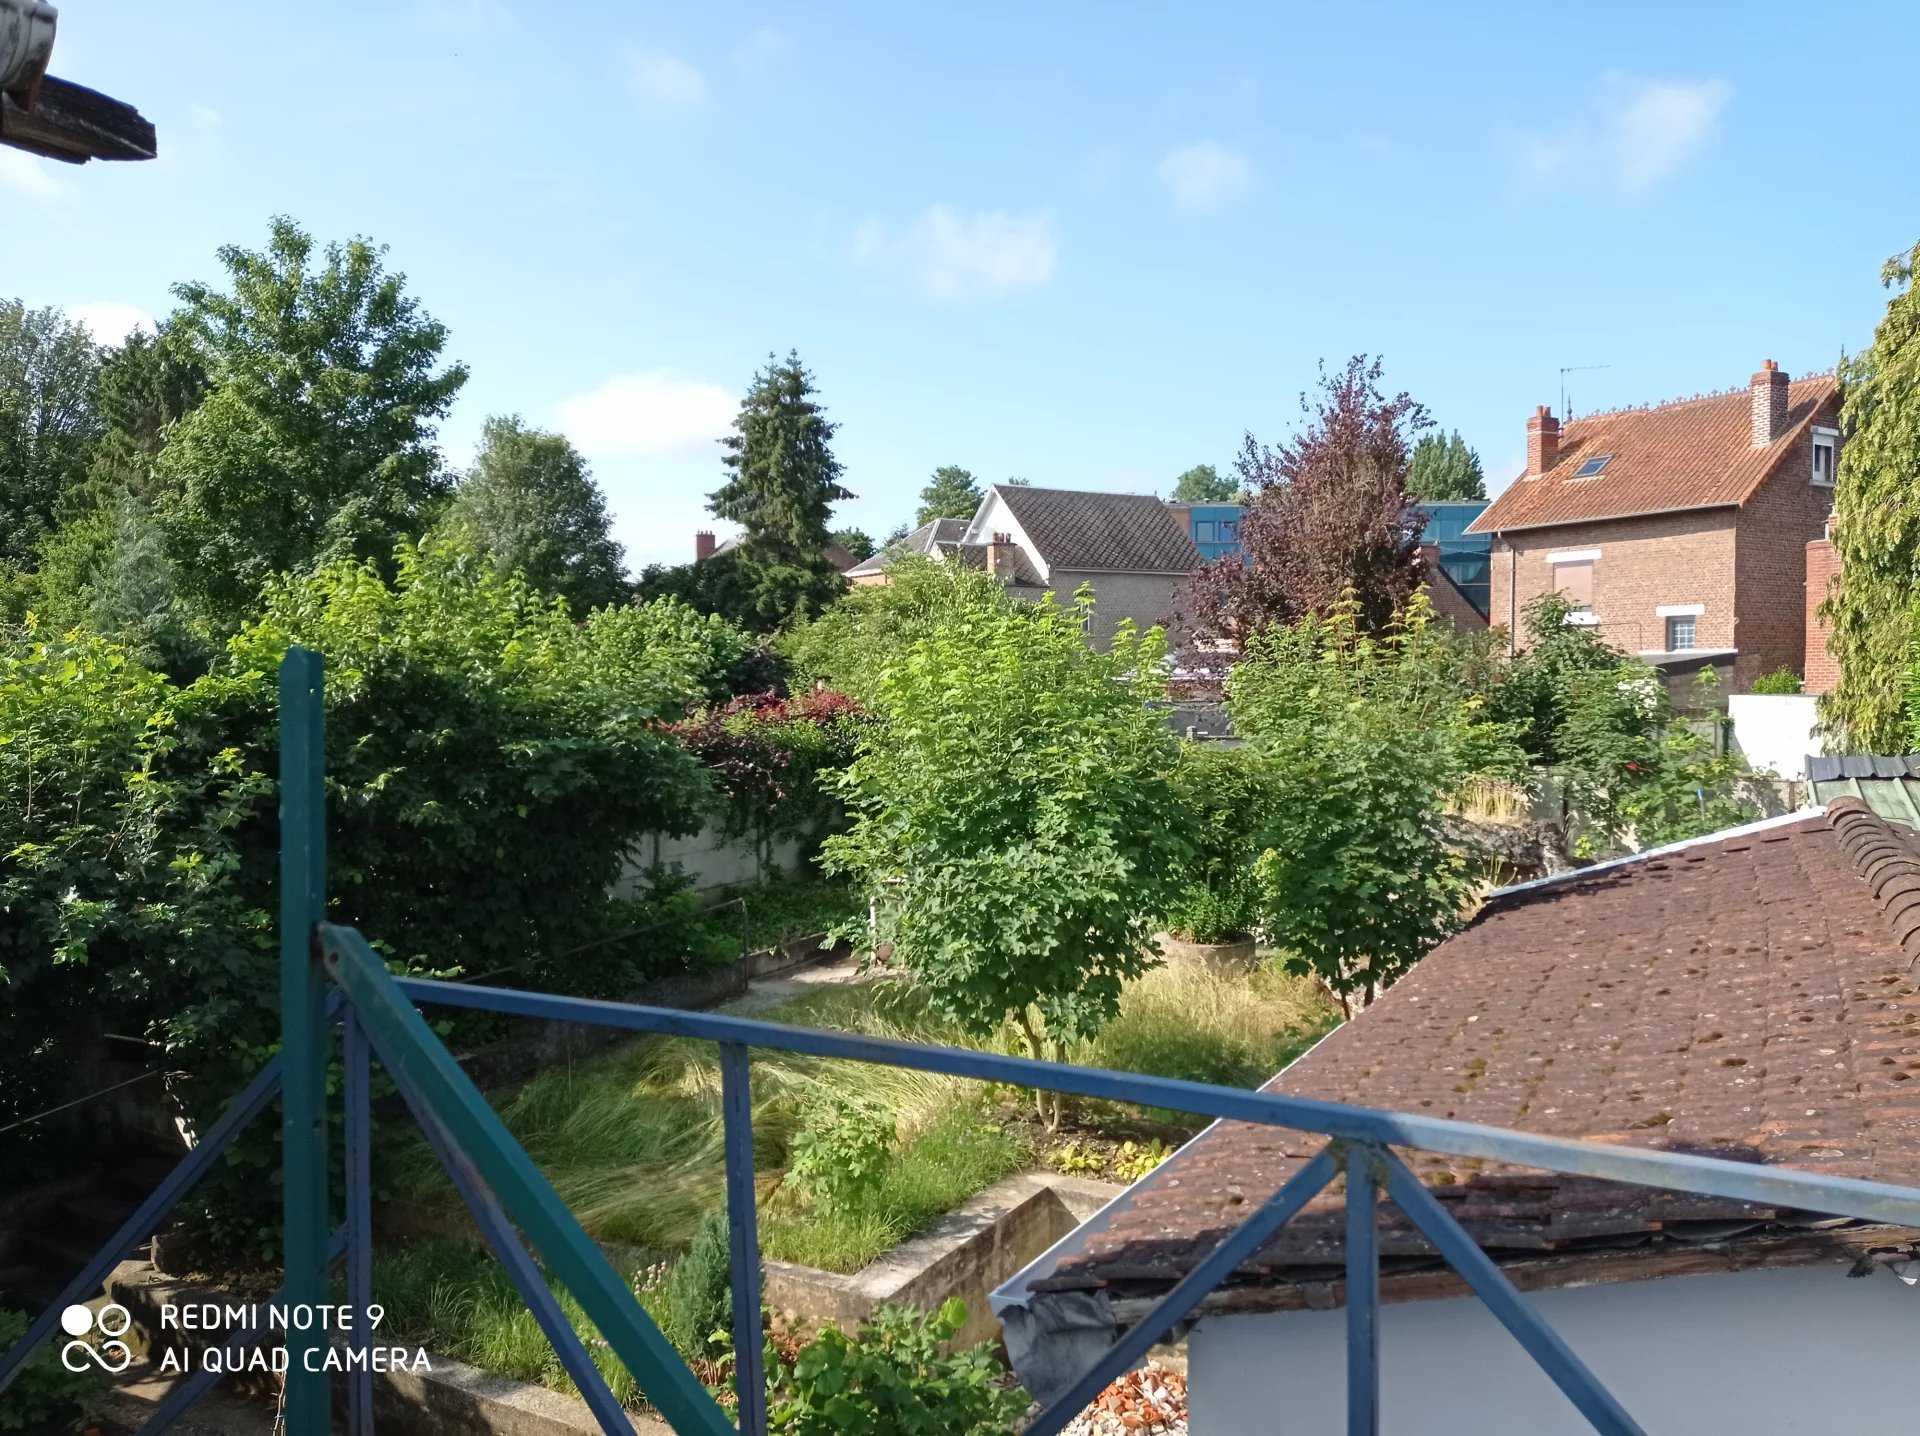 Andere im Avesnes-sur-Helpe, Nord 12274861